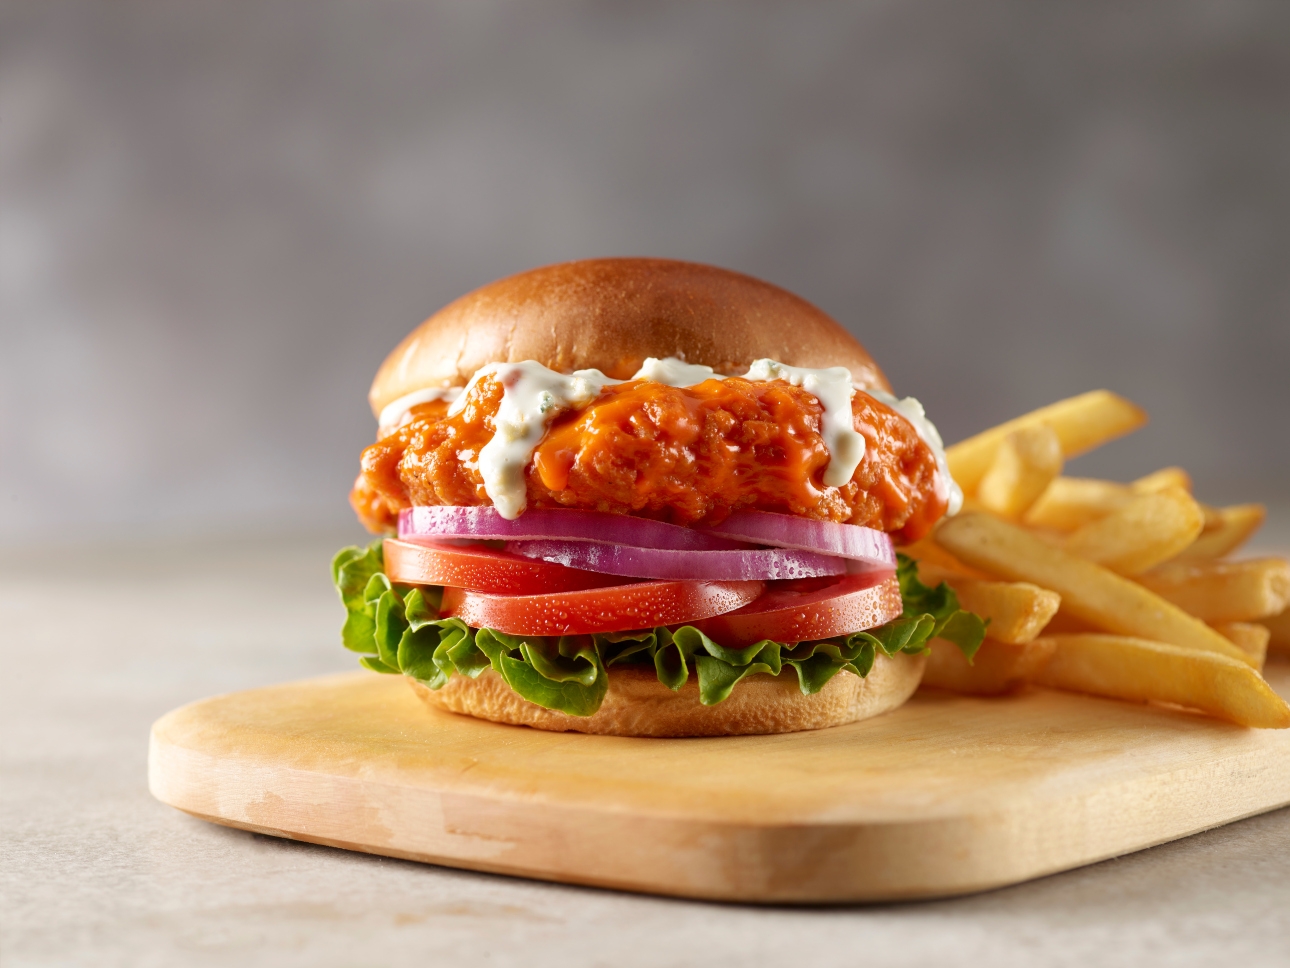 A toasted bun with breaded chicken tossed in buffalo sauce, paired with blue cheese dressing, lettuce, tomato, and onion.